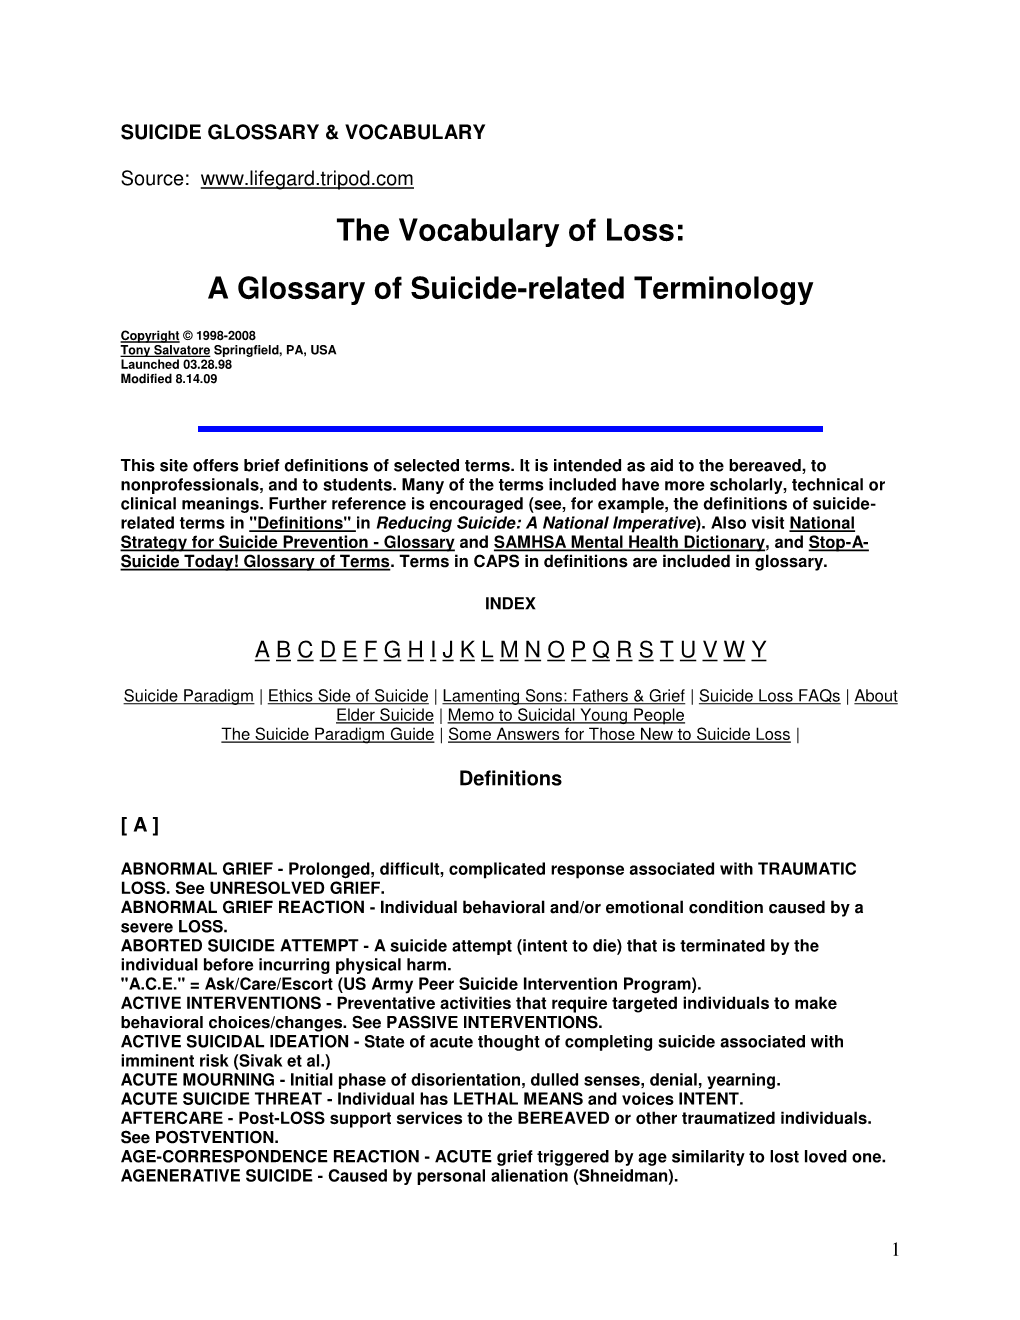 The Vocabulary of Loss: a Glossary of Suicide-Related Terminology